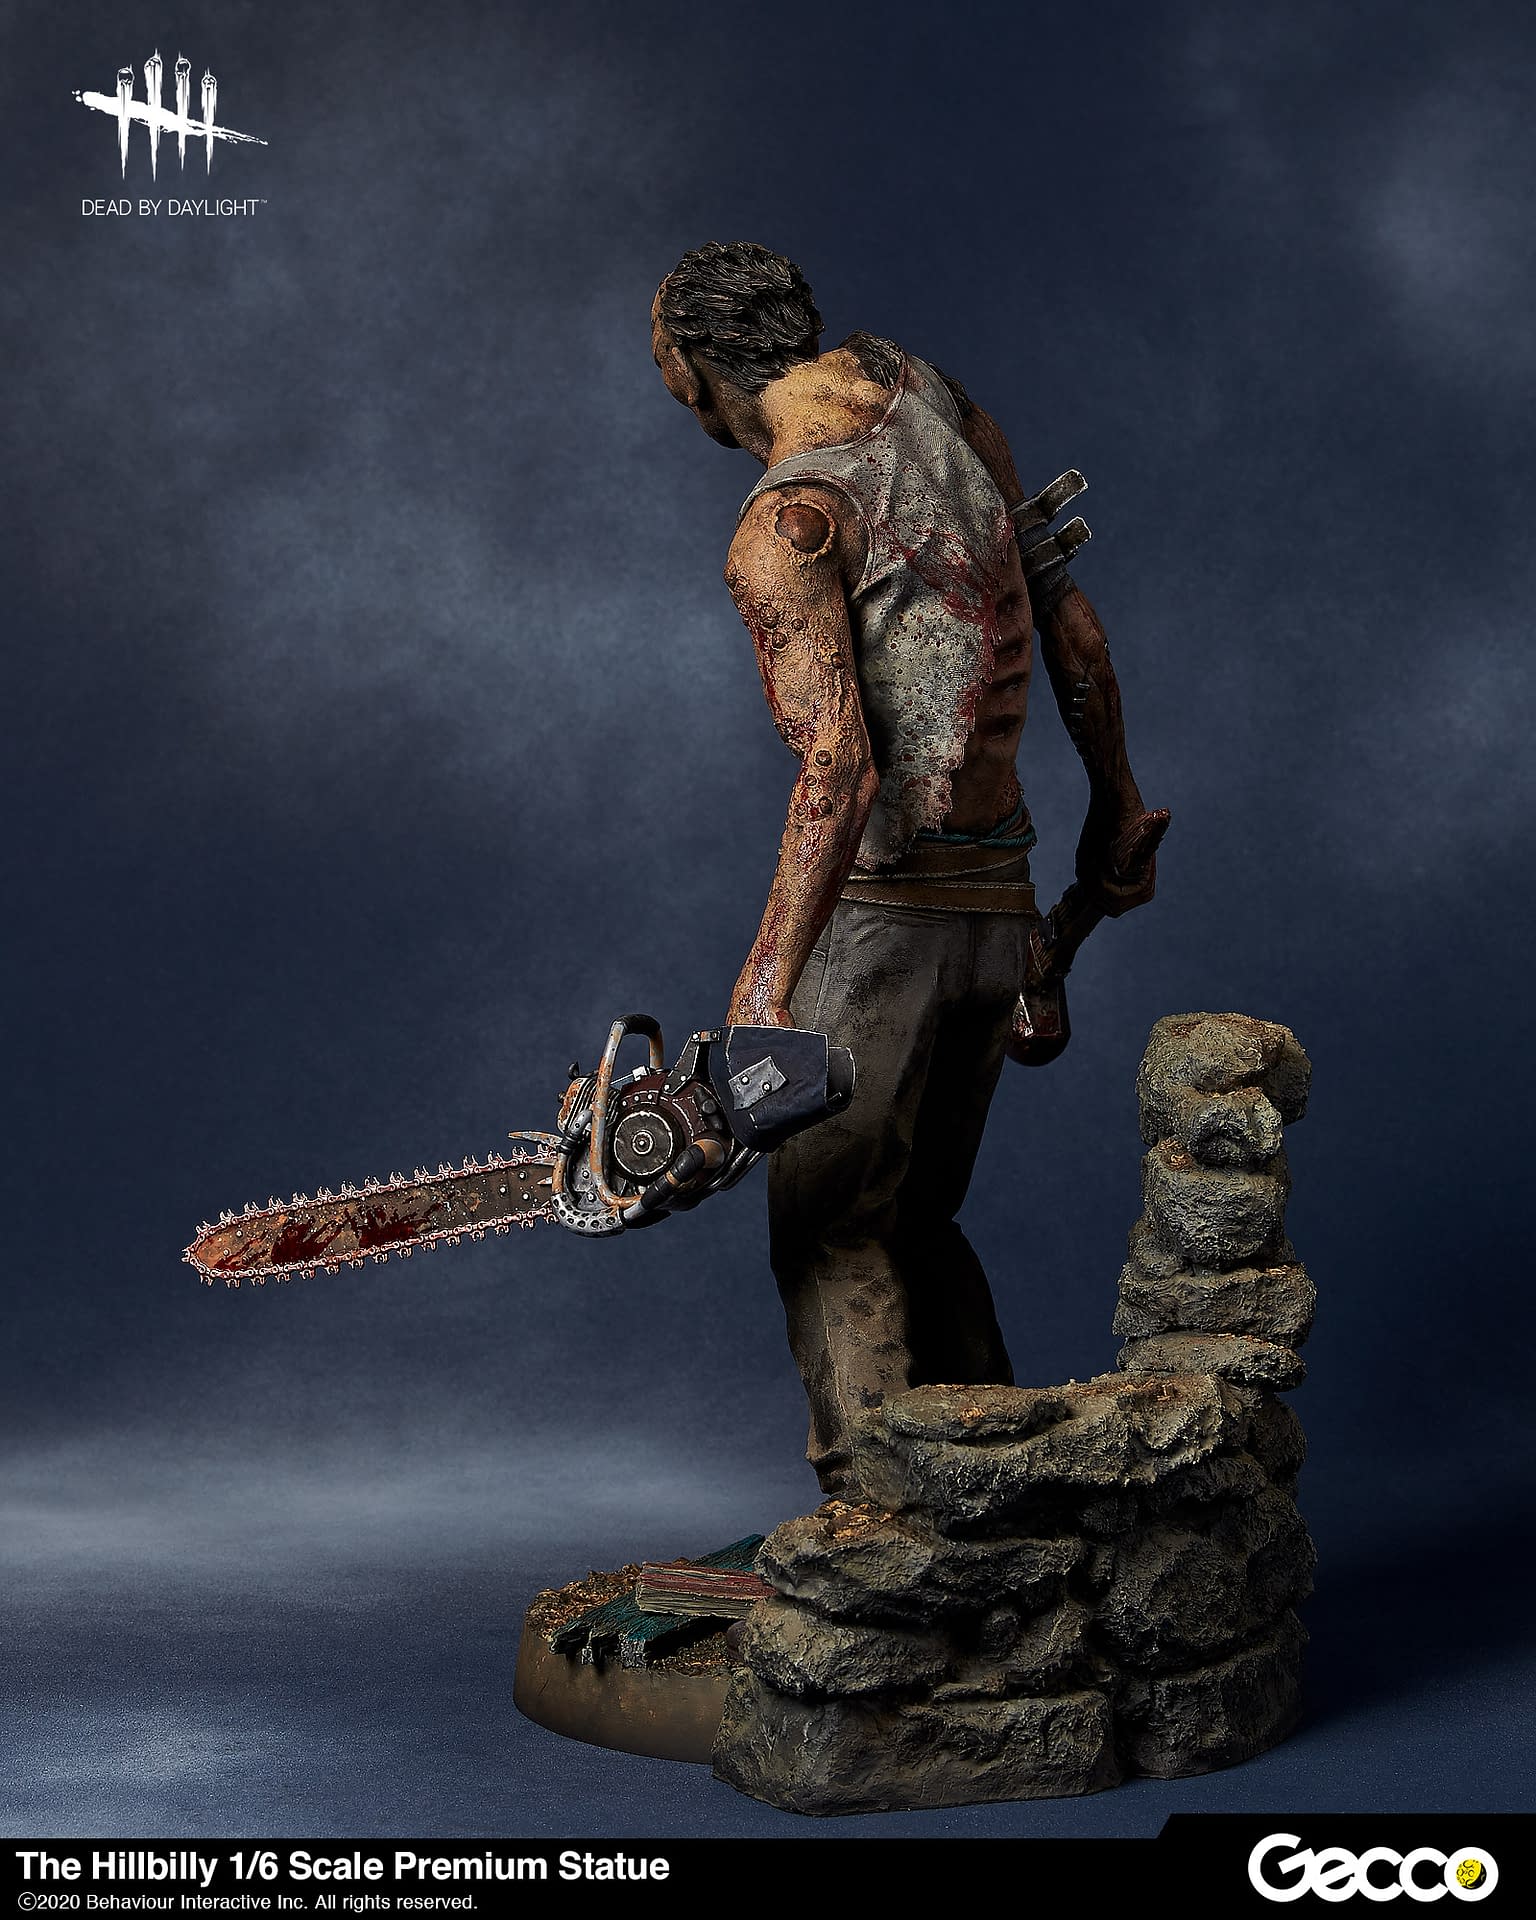 Gecco-Dead-by-Daylight-Hillbilly-Statue-007